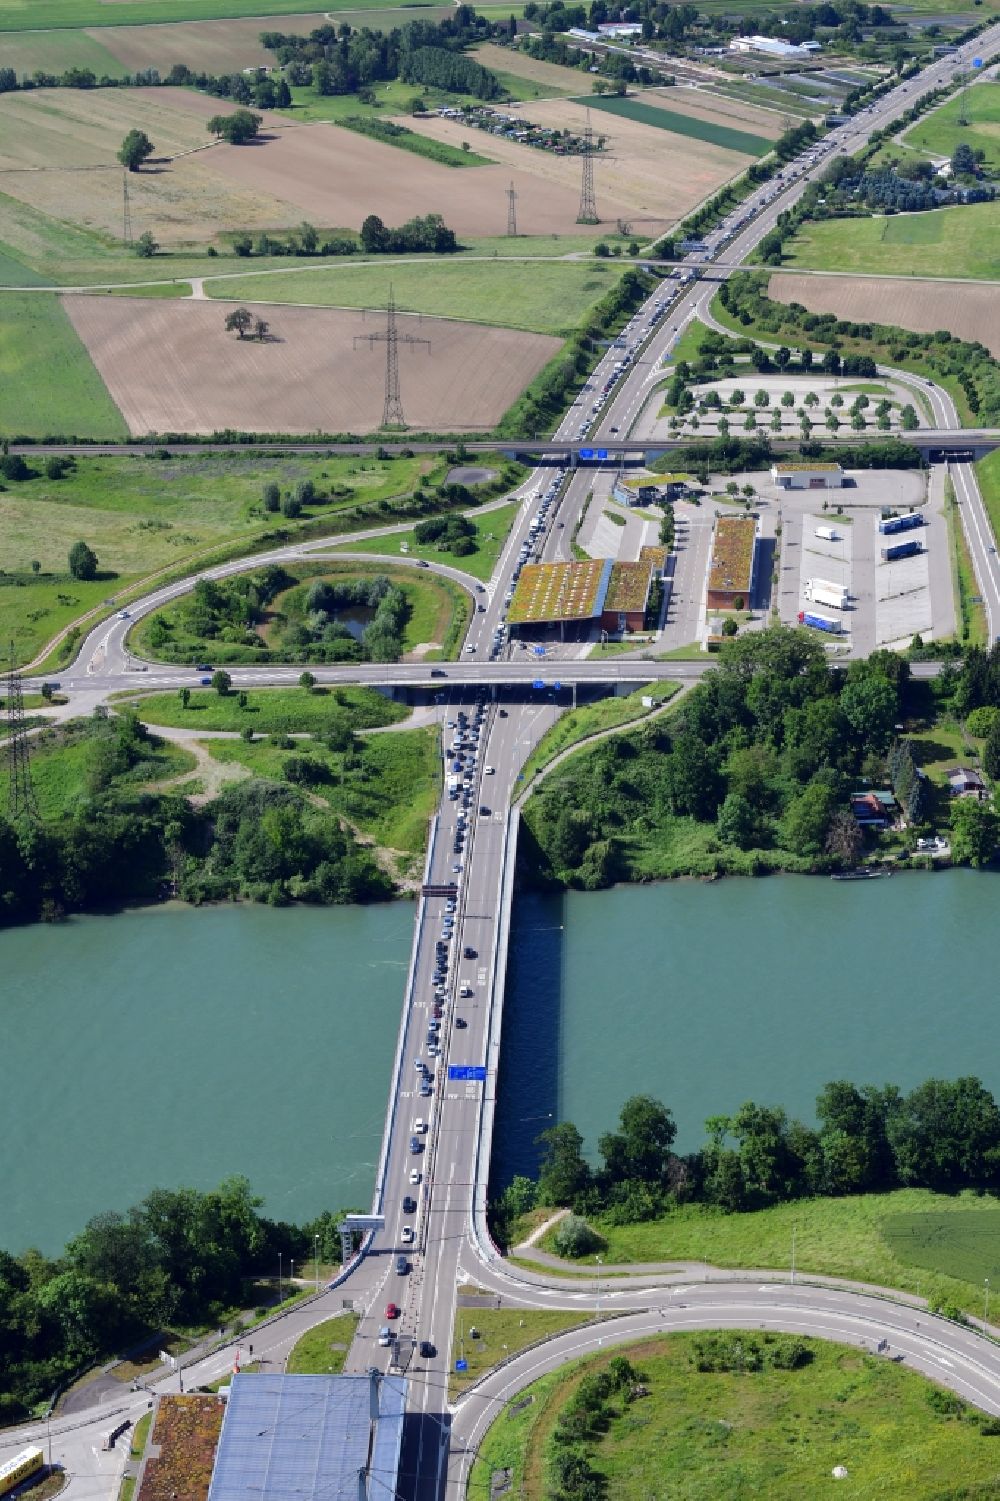 Aerial photograph Rheinfelden (Baden) - Highway congestion along the route of the lanes of the motorway A861 over the Rhine bridge at the border and customs buildings of Switzerland and Germany in Rheinfelden in the canton Aargau, Switzerland and Germany, Baden-Wurttemberg